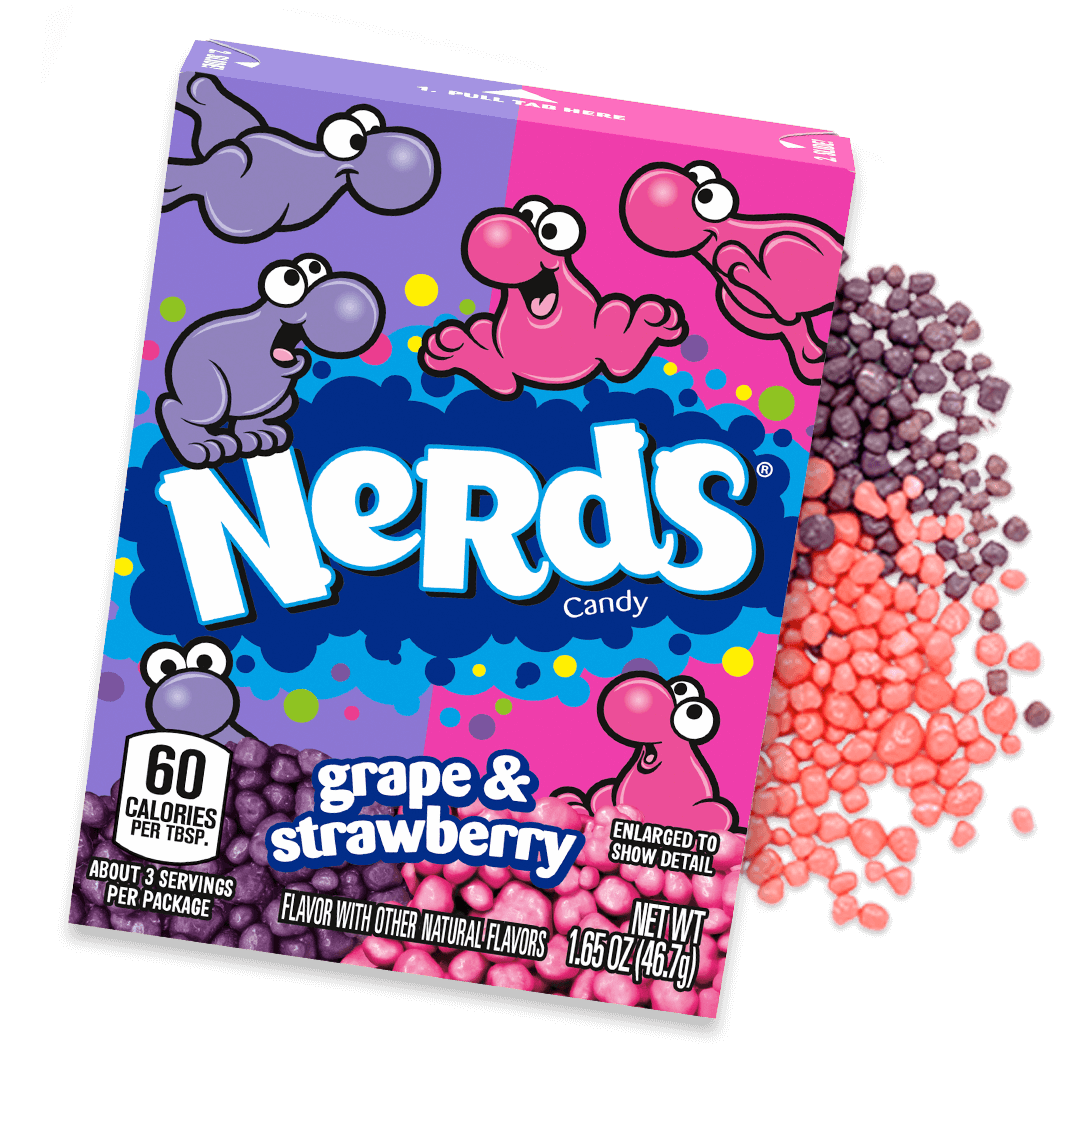 Nerds Candy Flavors